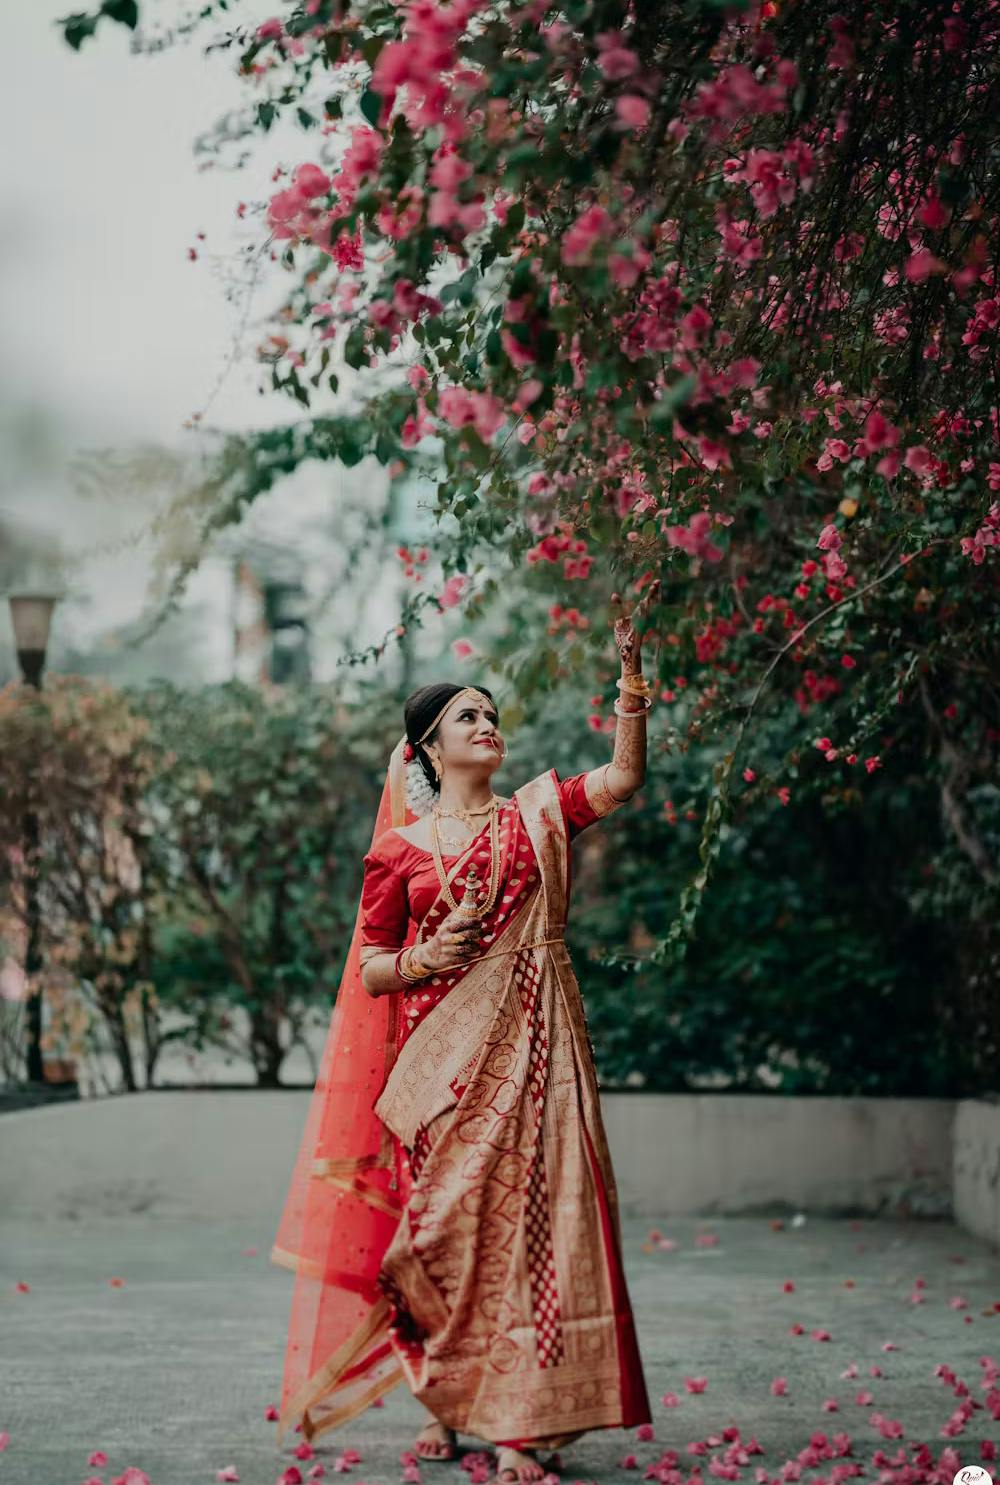  Best Bridal Pose Amidst The Peaceful Nature
